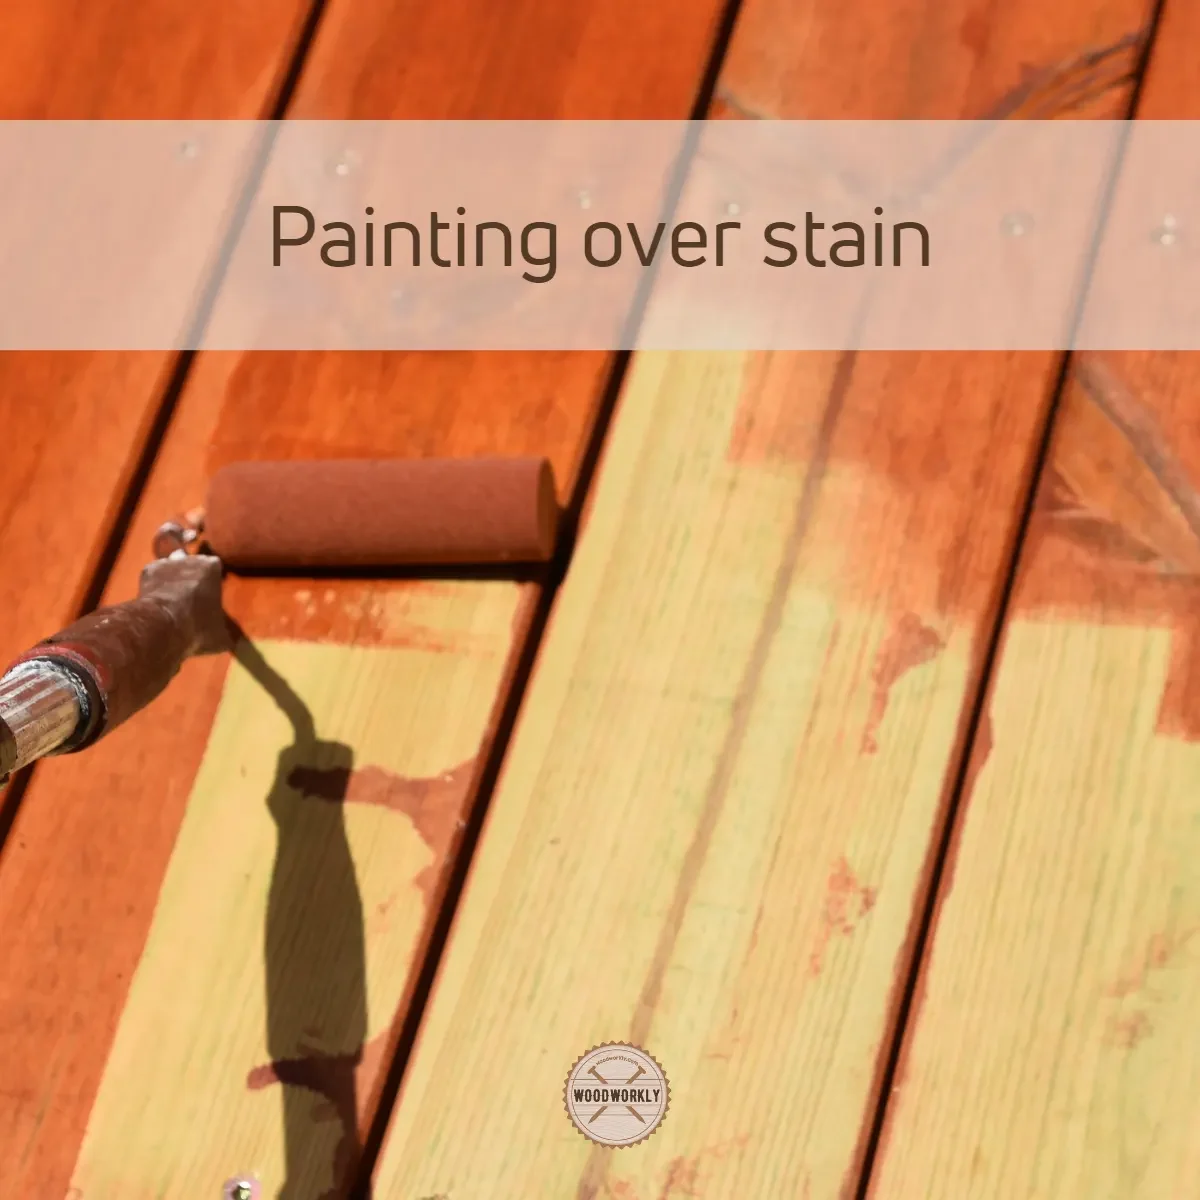 Painting over stain